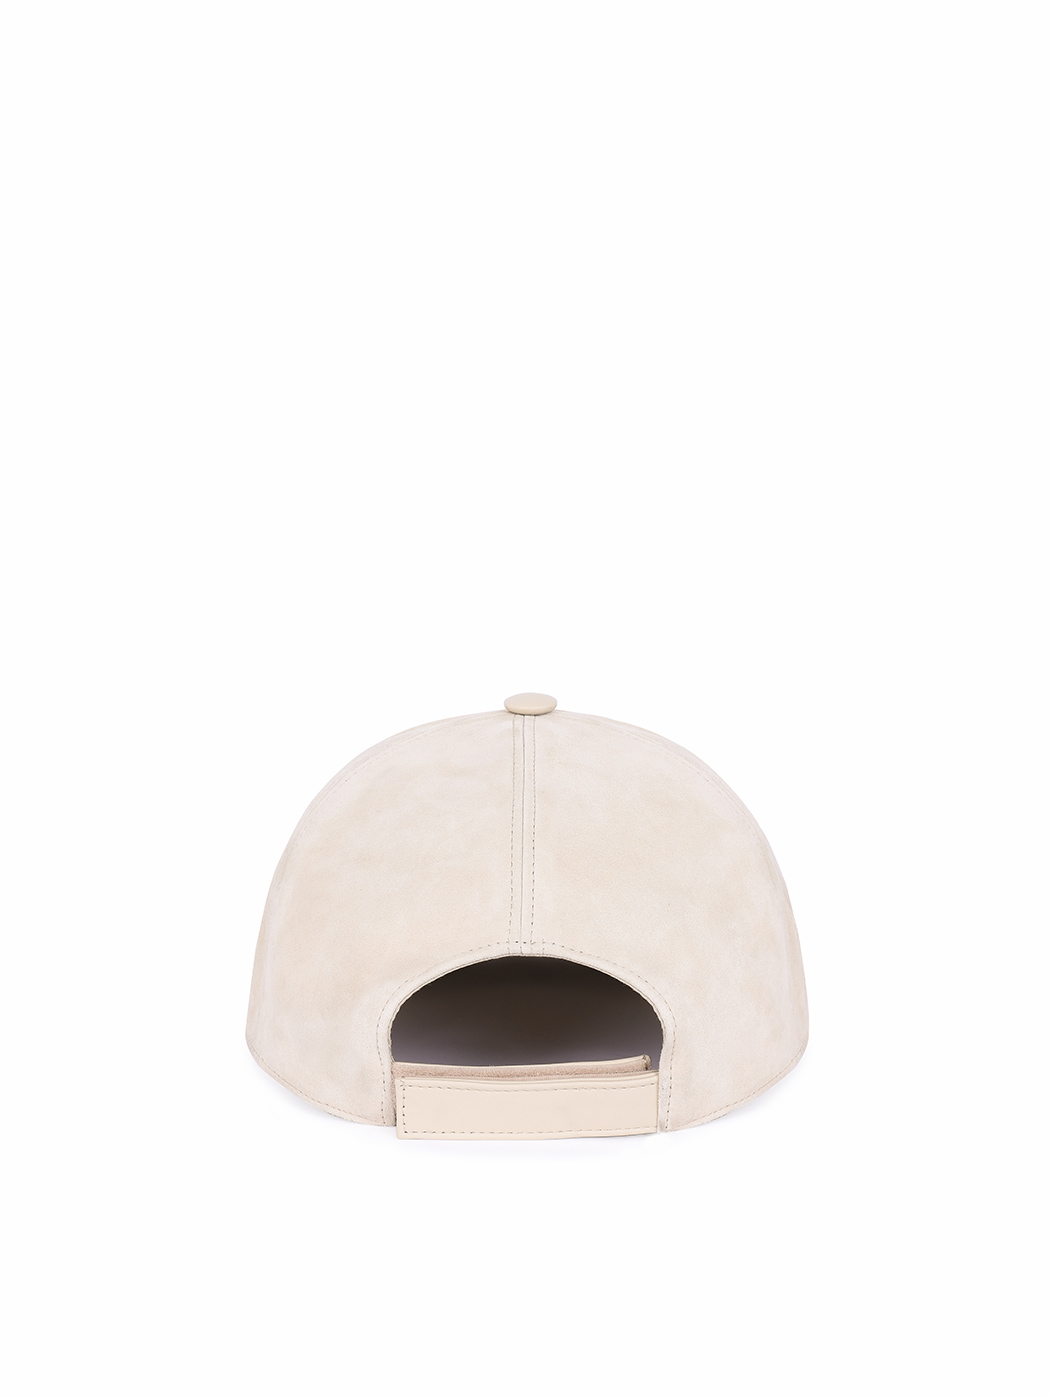 Baseball hat in leather and suede